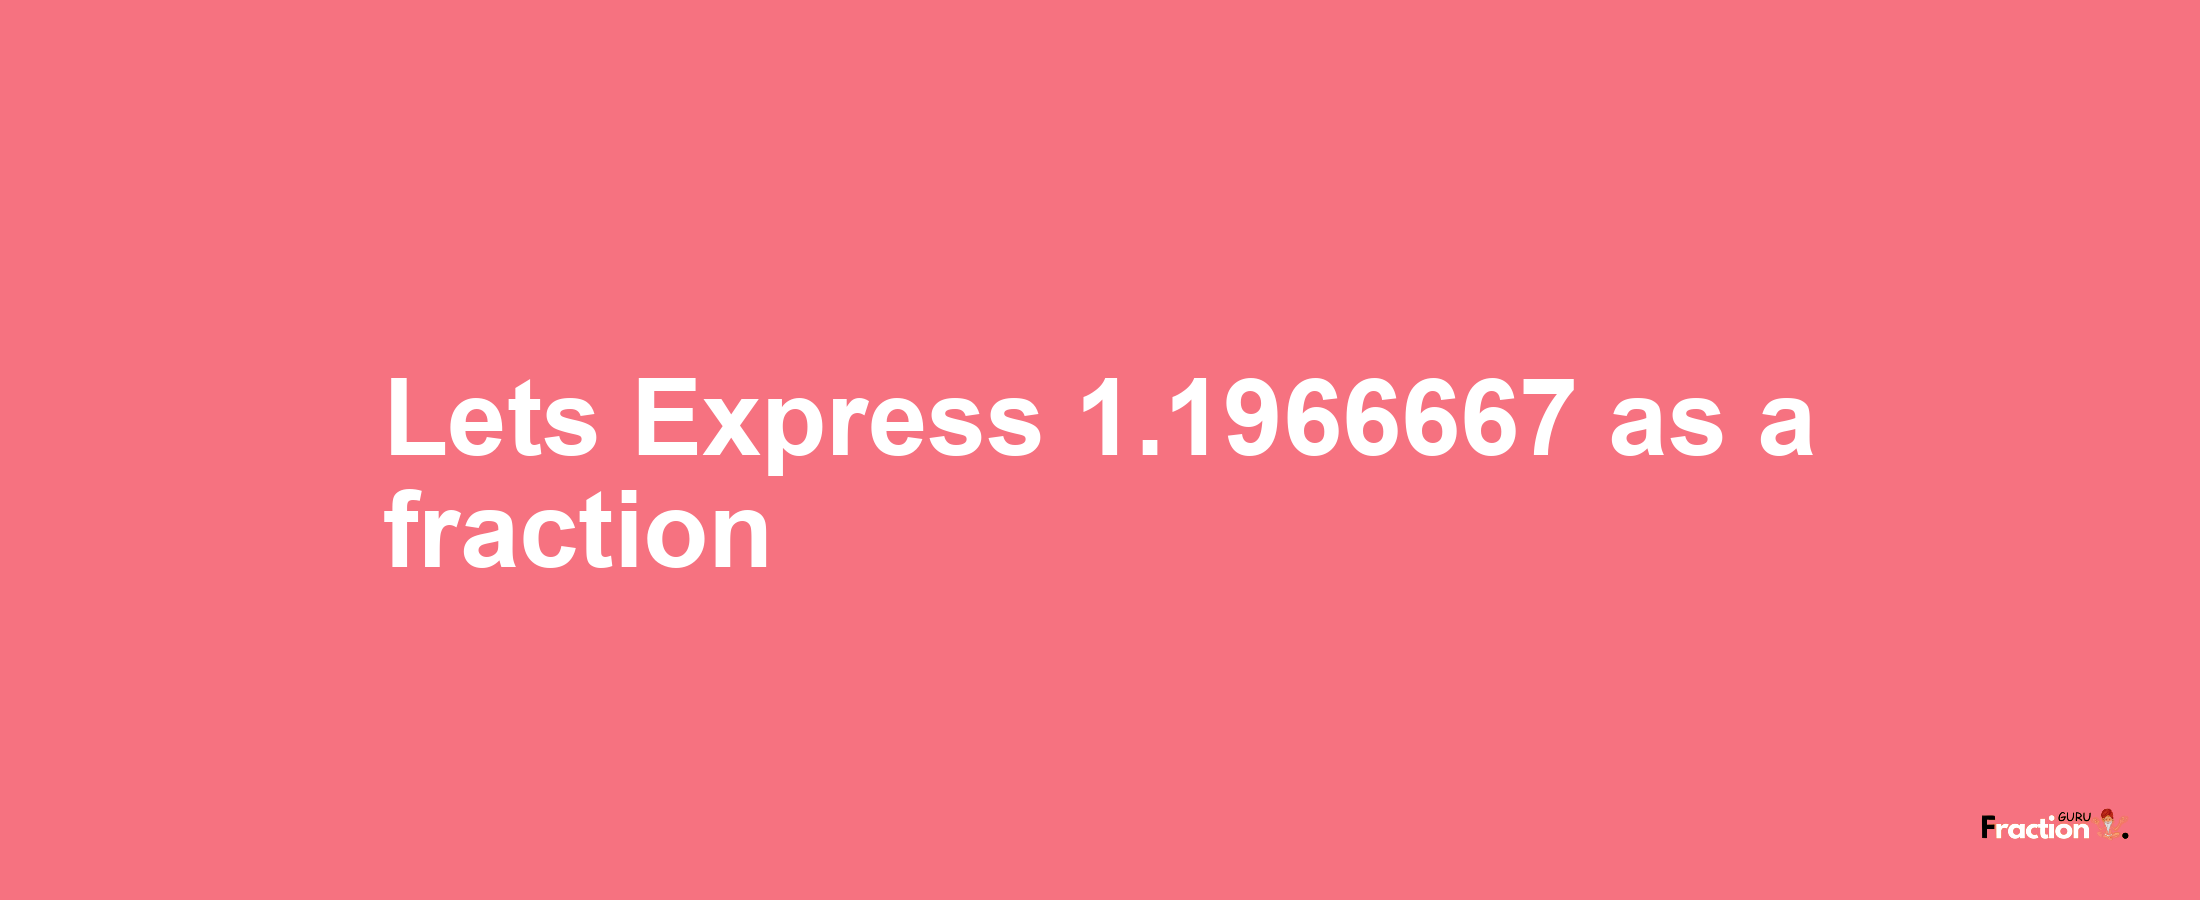 Lets Express 1.1966667 as afraction